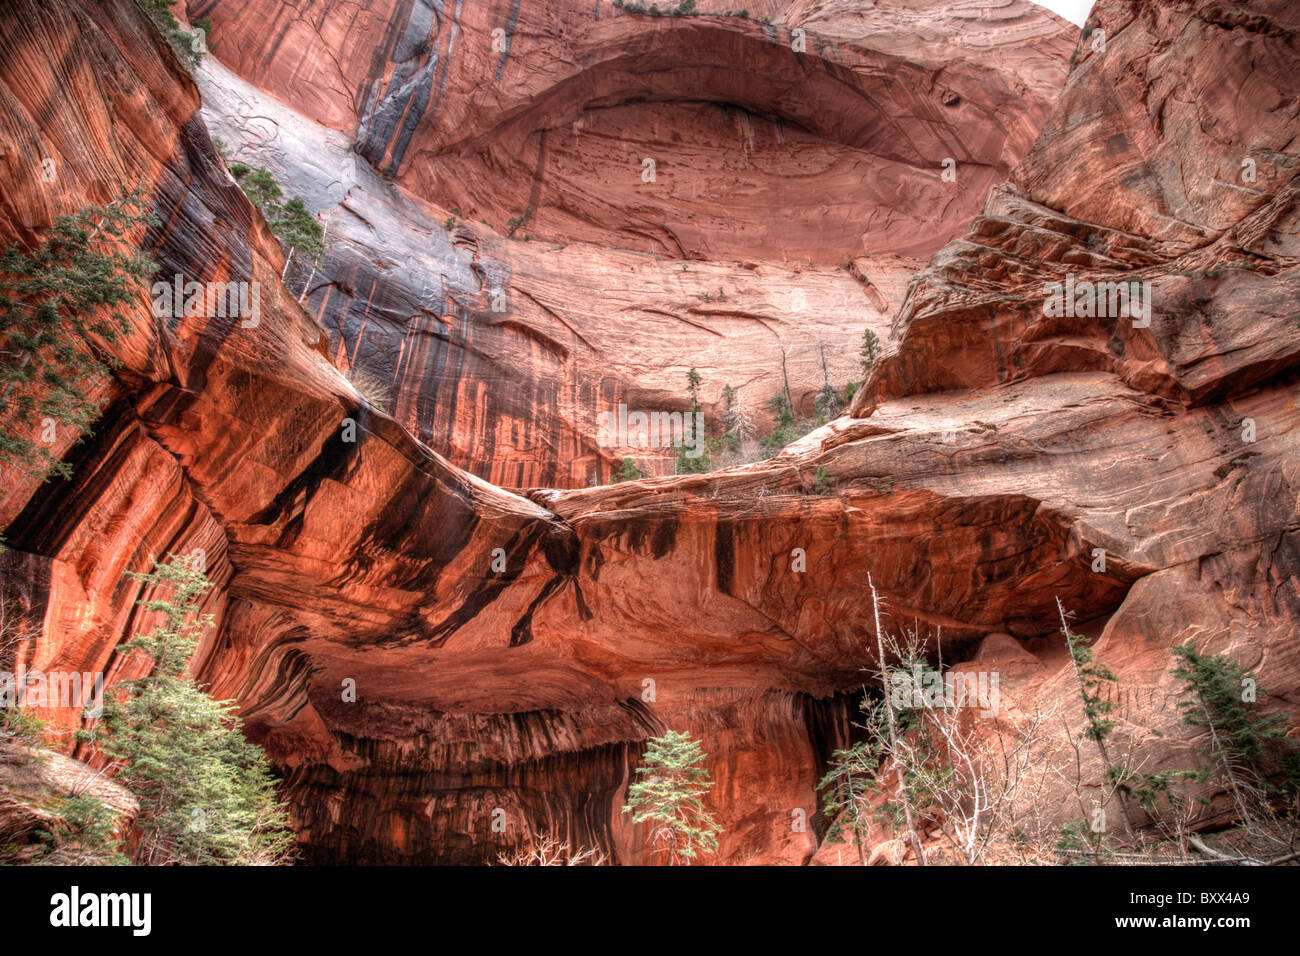 Double Arch Alcove in the Kolob Canyons area of Zion National Park, Utah, USA. Stock Photo